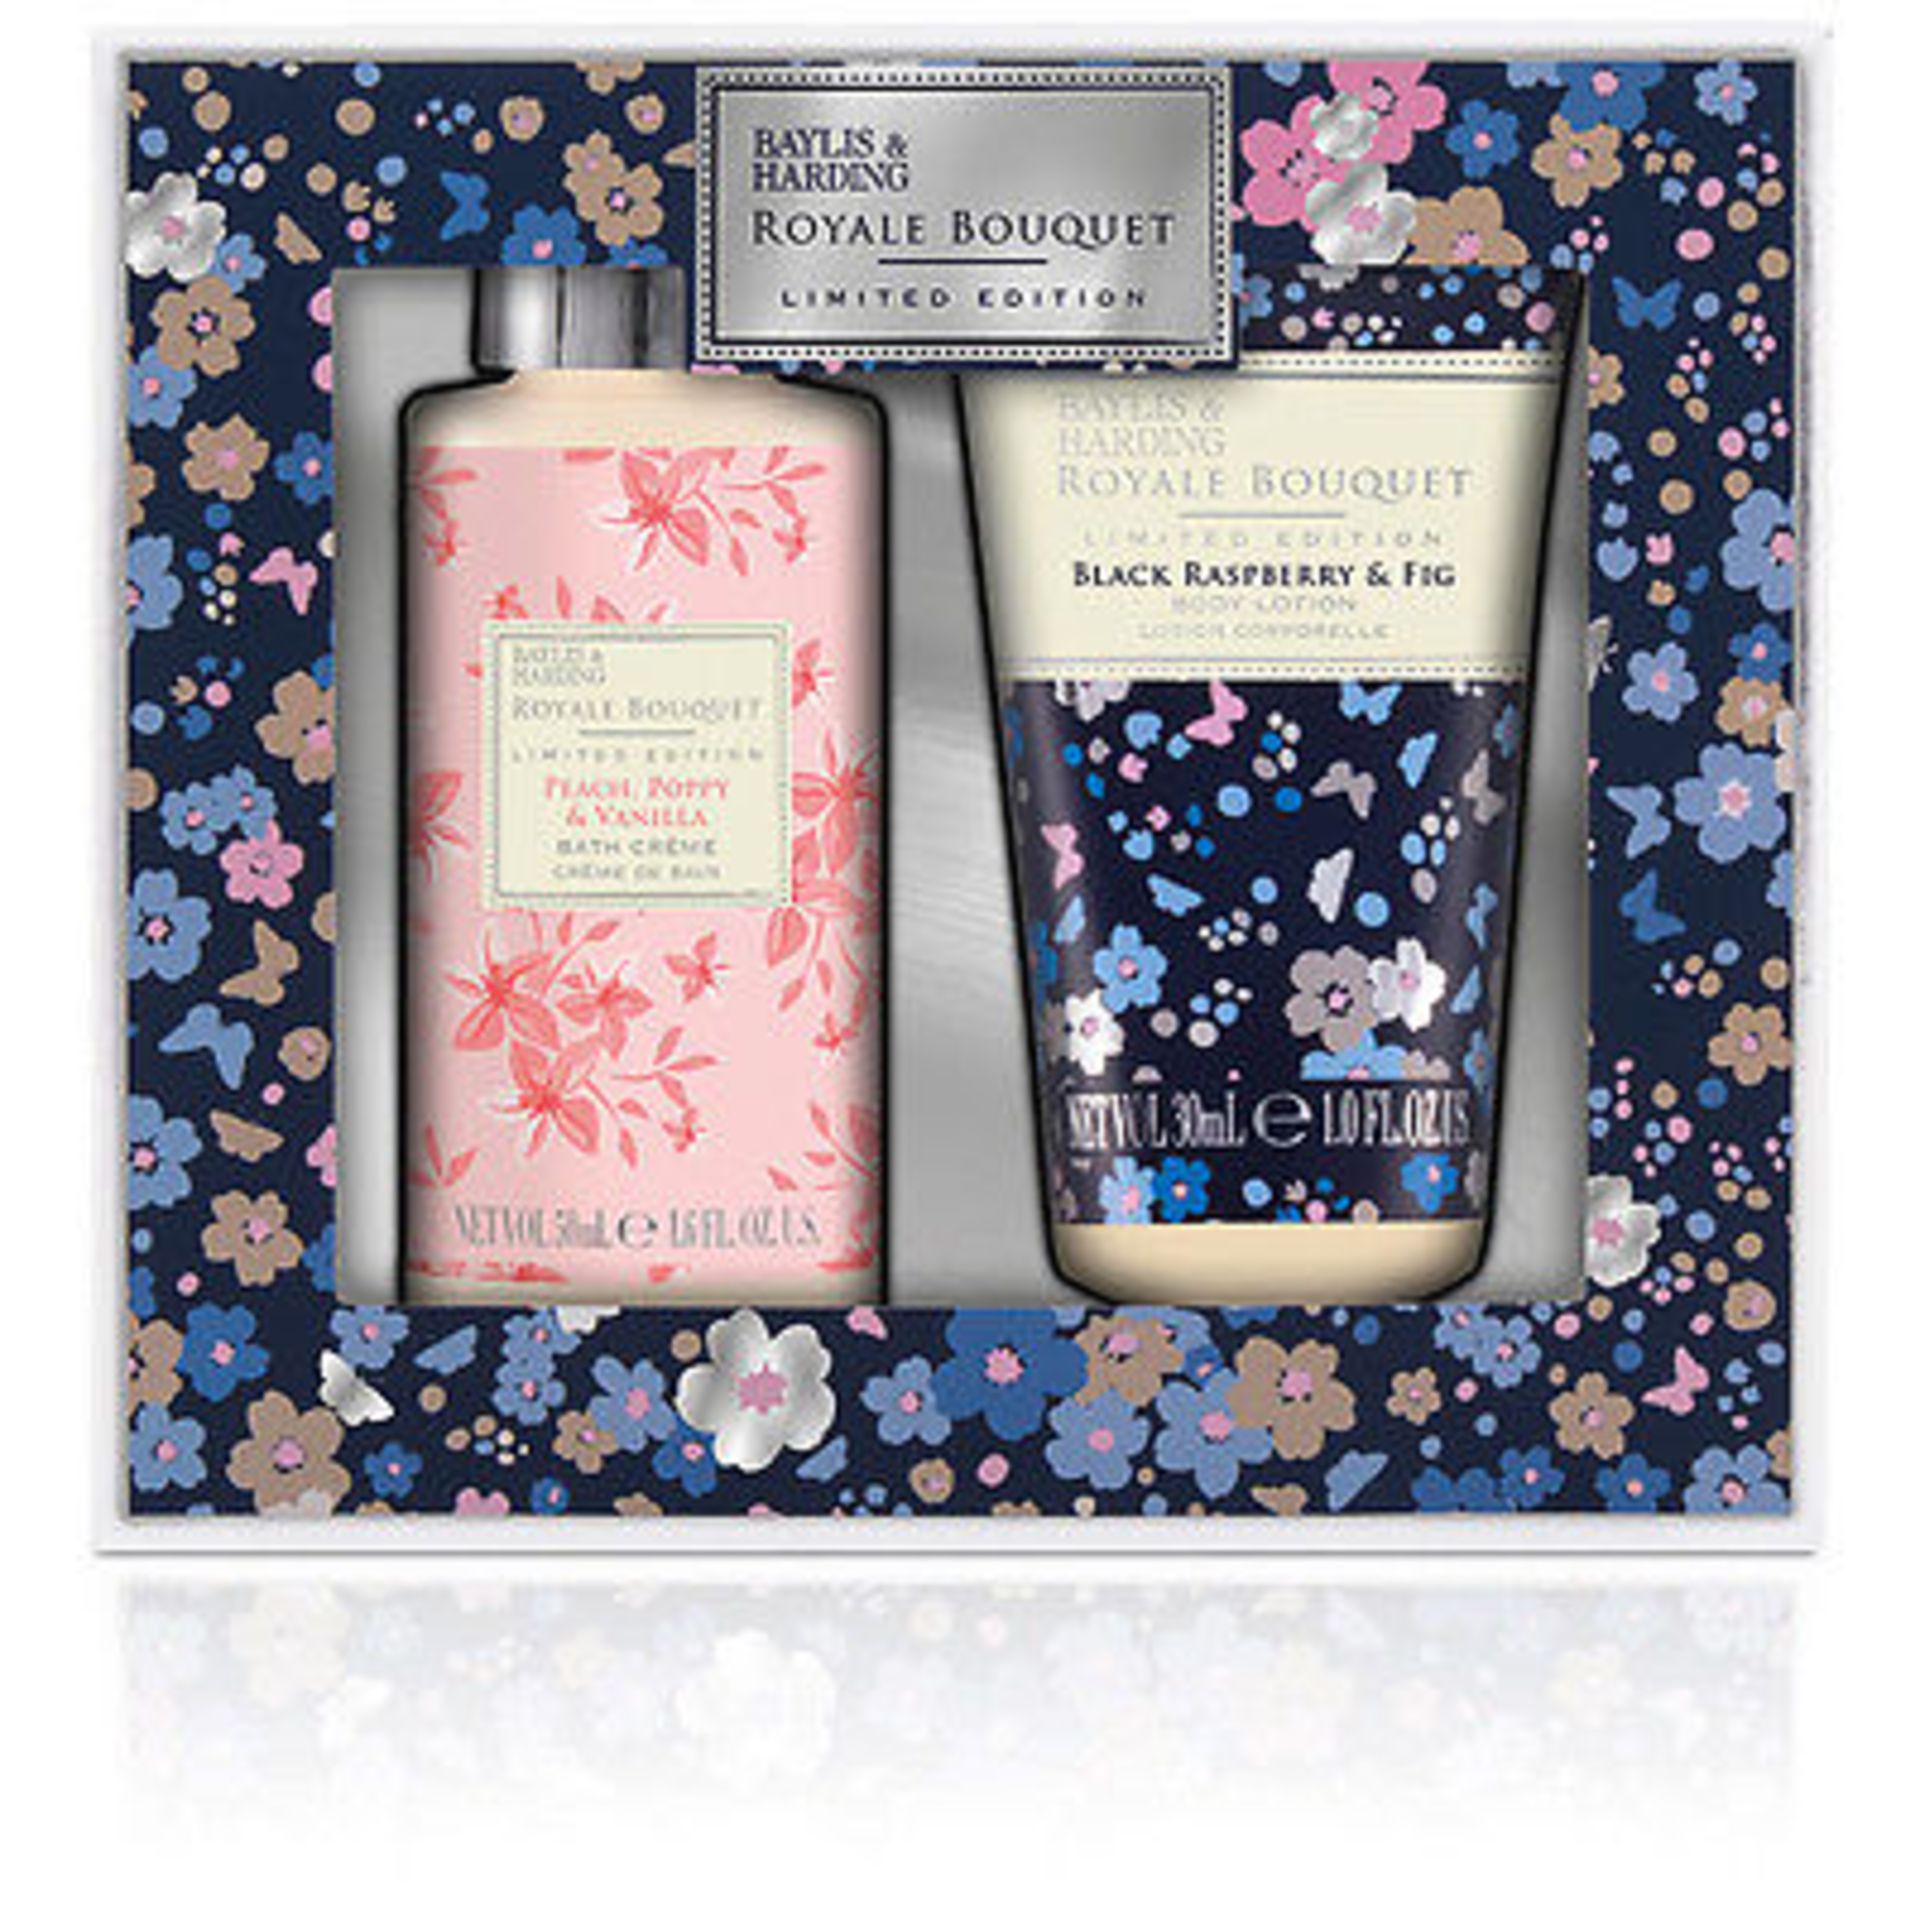 V Brand New Baylis & Harding Royale Bouquet Limited Edition Duo Set - Including 30ml Body Lotion and